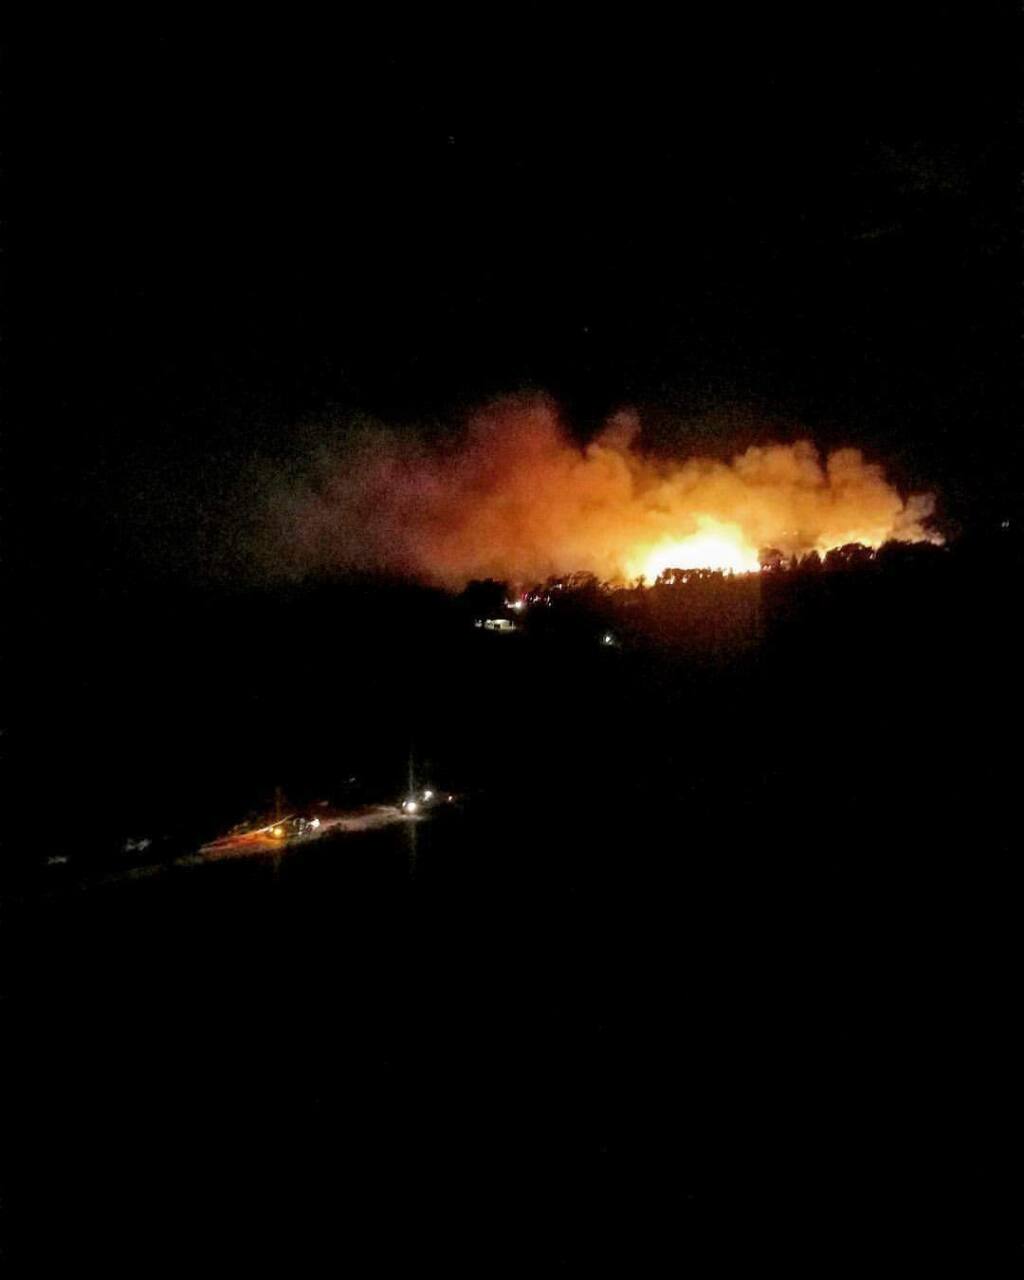 A fire broke out at a Lake Sonoma campsite early Sunday, Aug. 13, 2017. (Submitted by Sara Baxter)